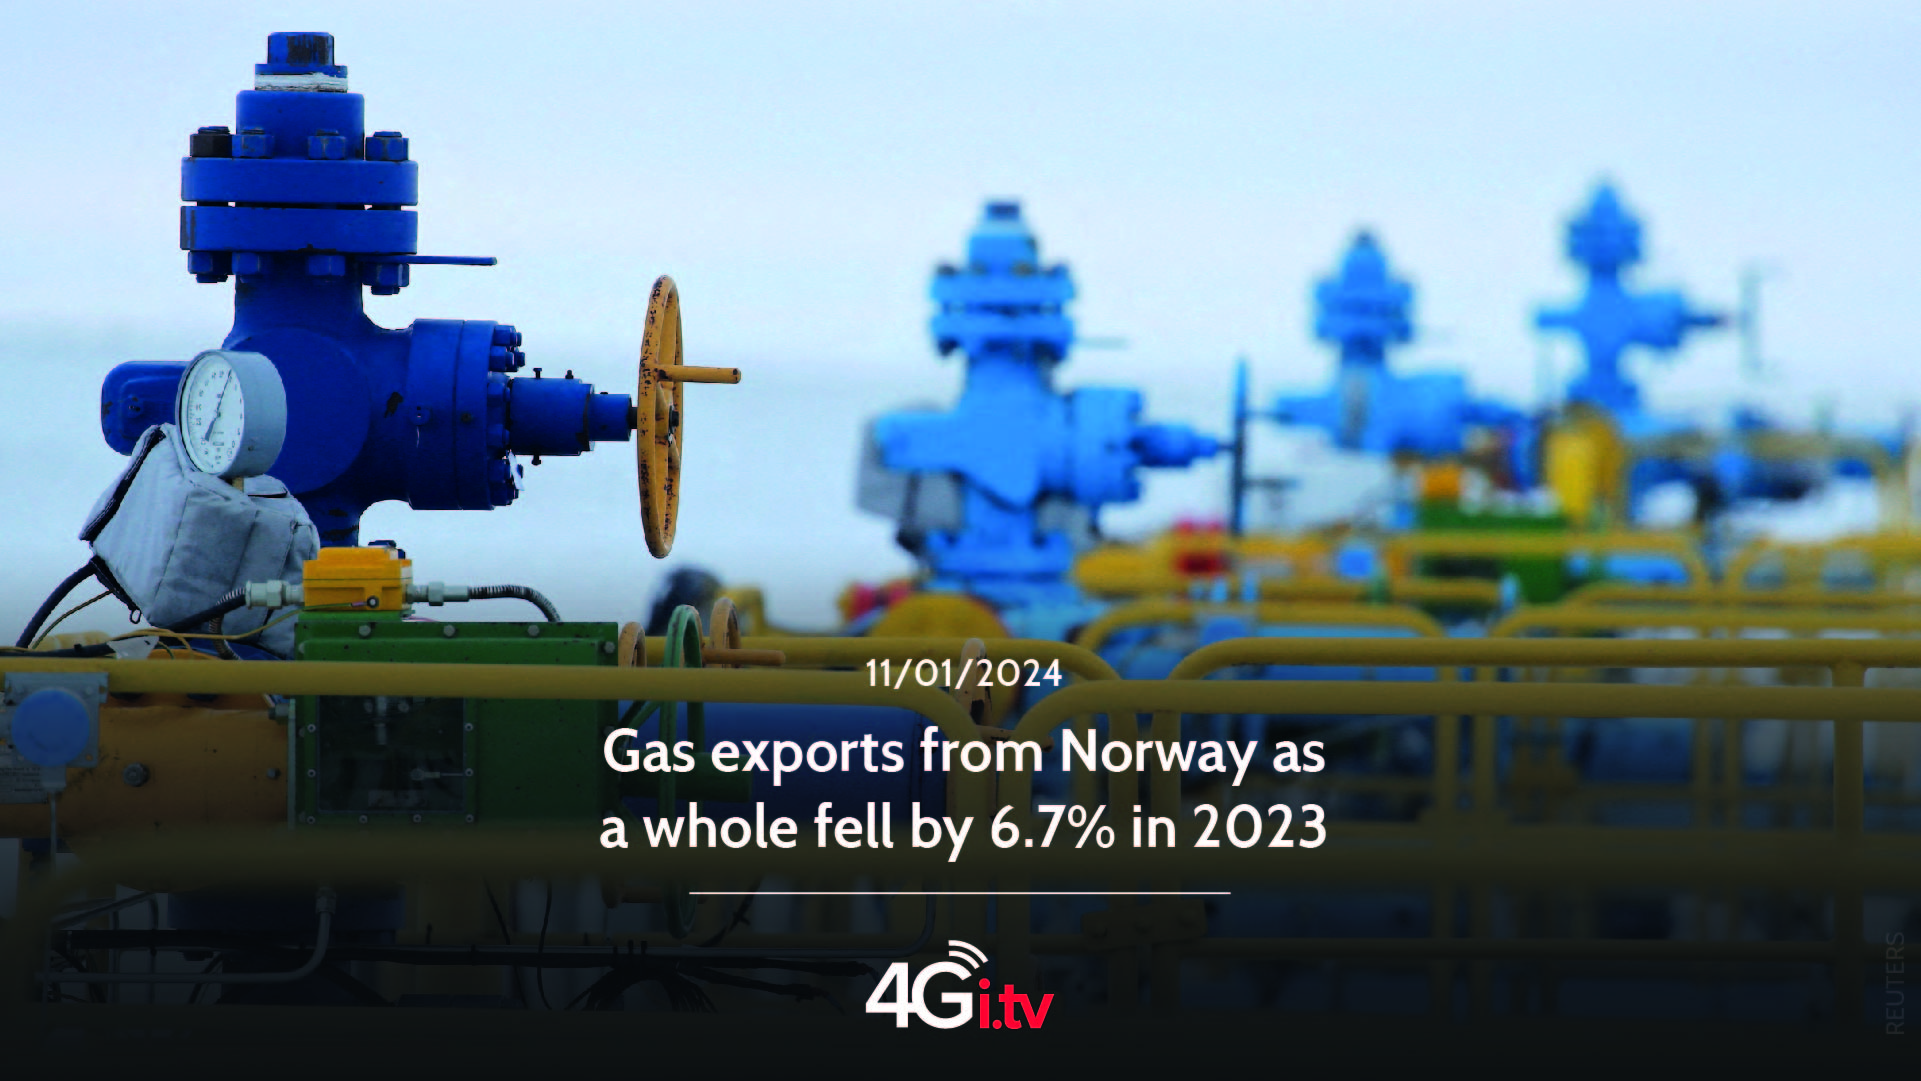 Lesen Sie mehr über den Artikel Gas exports from Norway as a whole fell by 6.7% in 2023